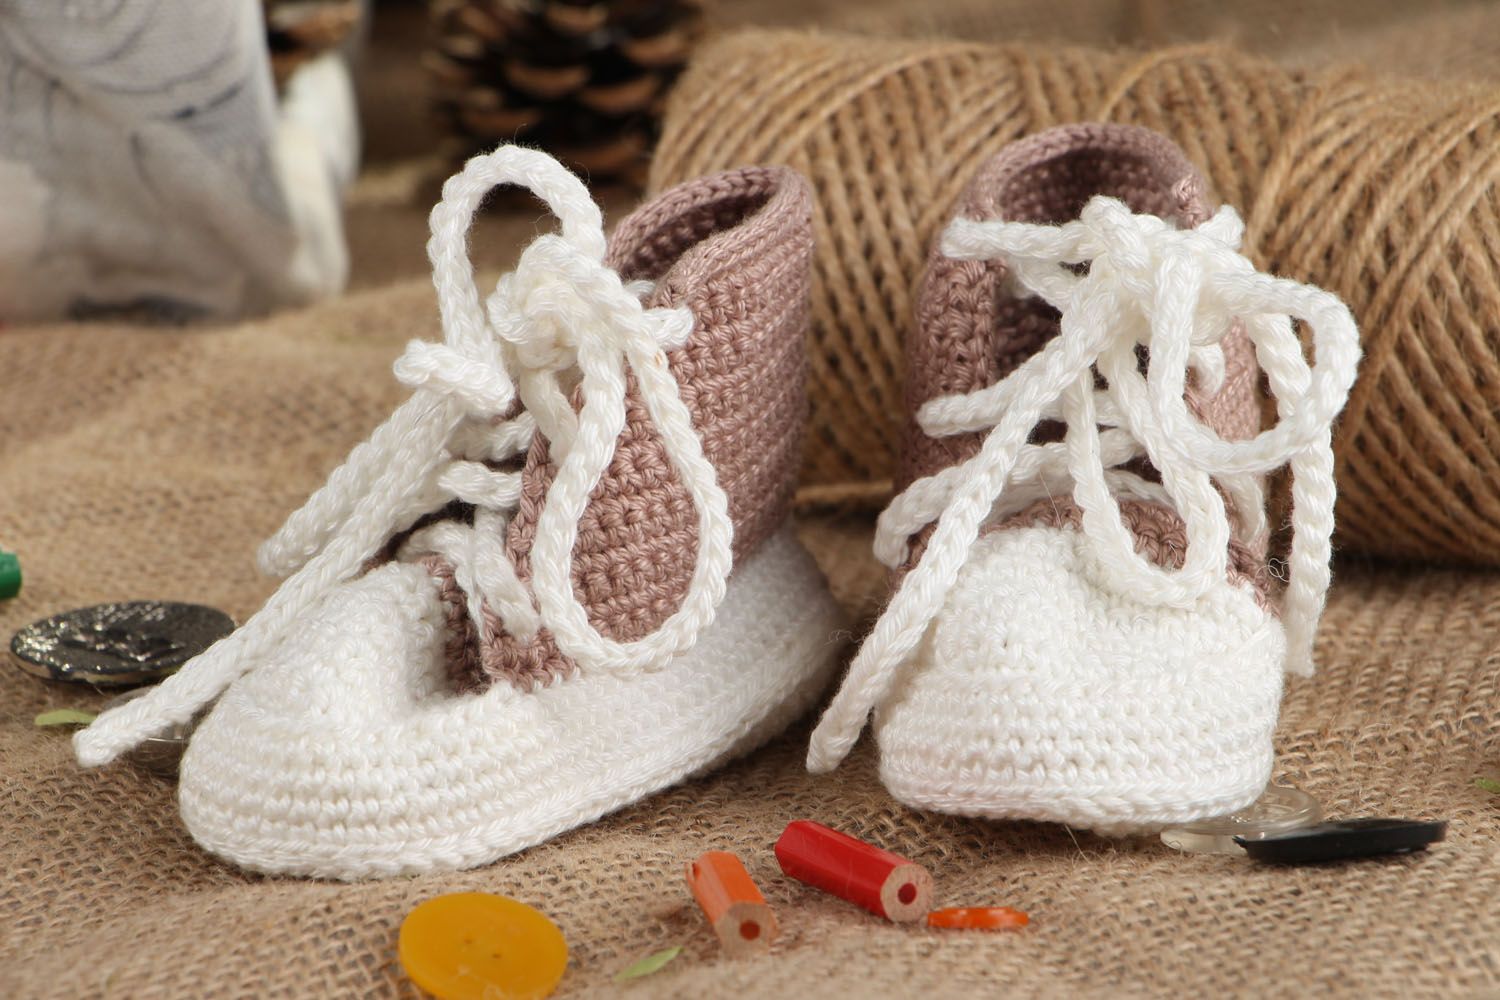 Crocheted shoes for dolls photo 5